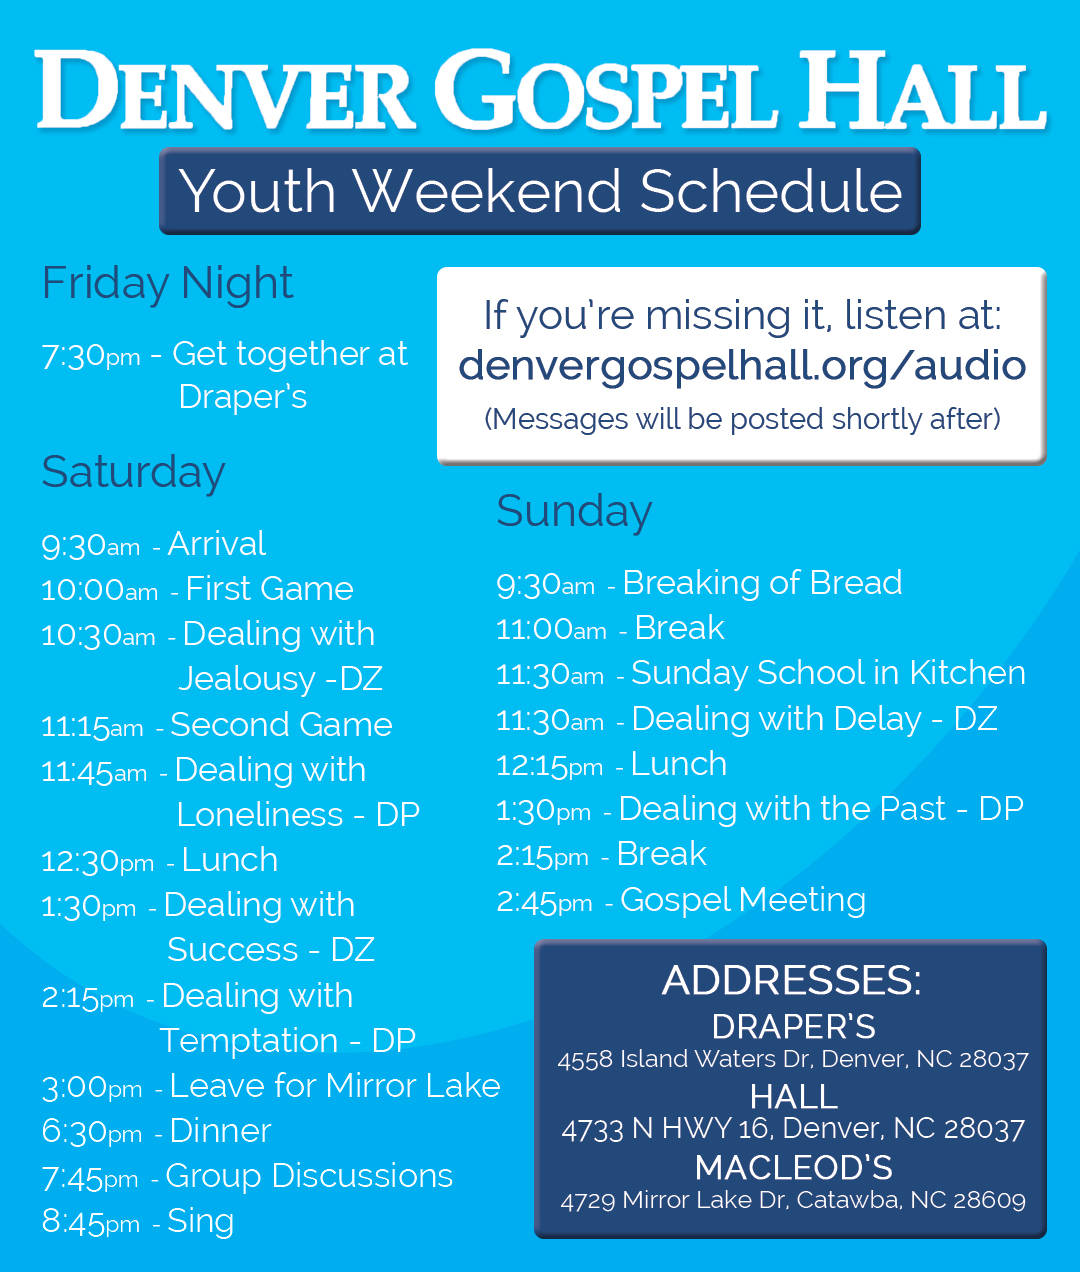 DGH Youth Weekend Schedule 2021